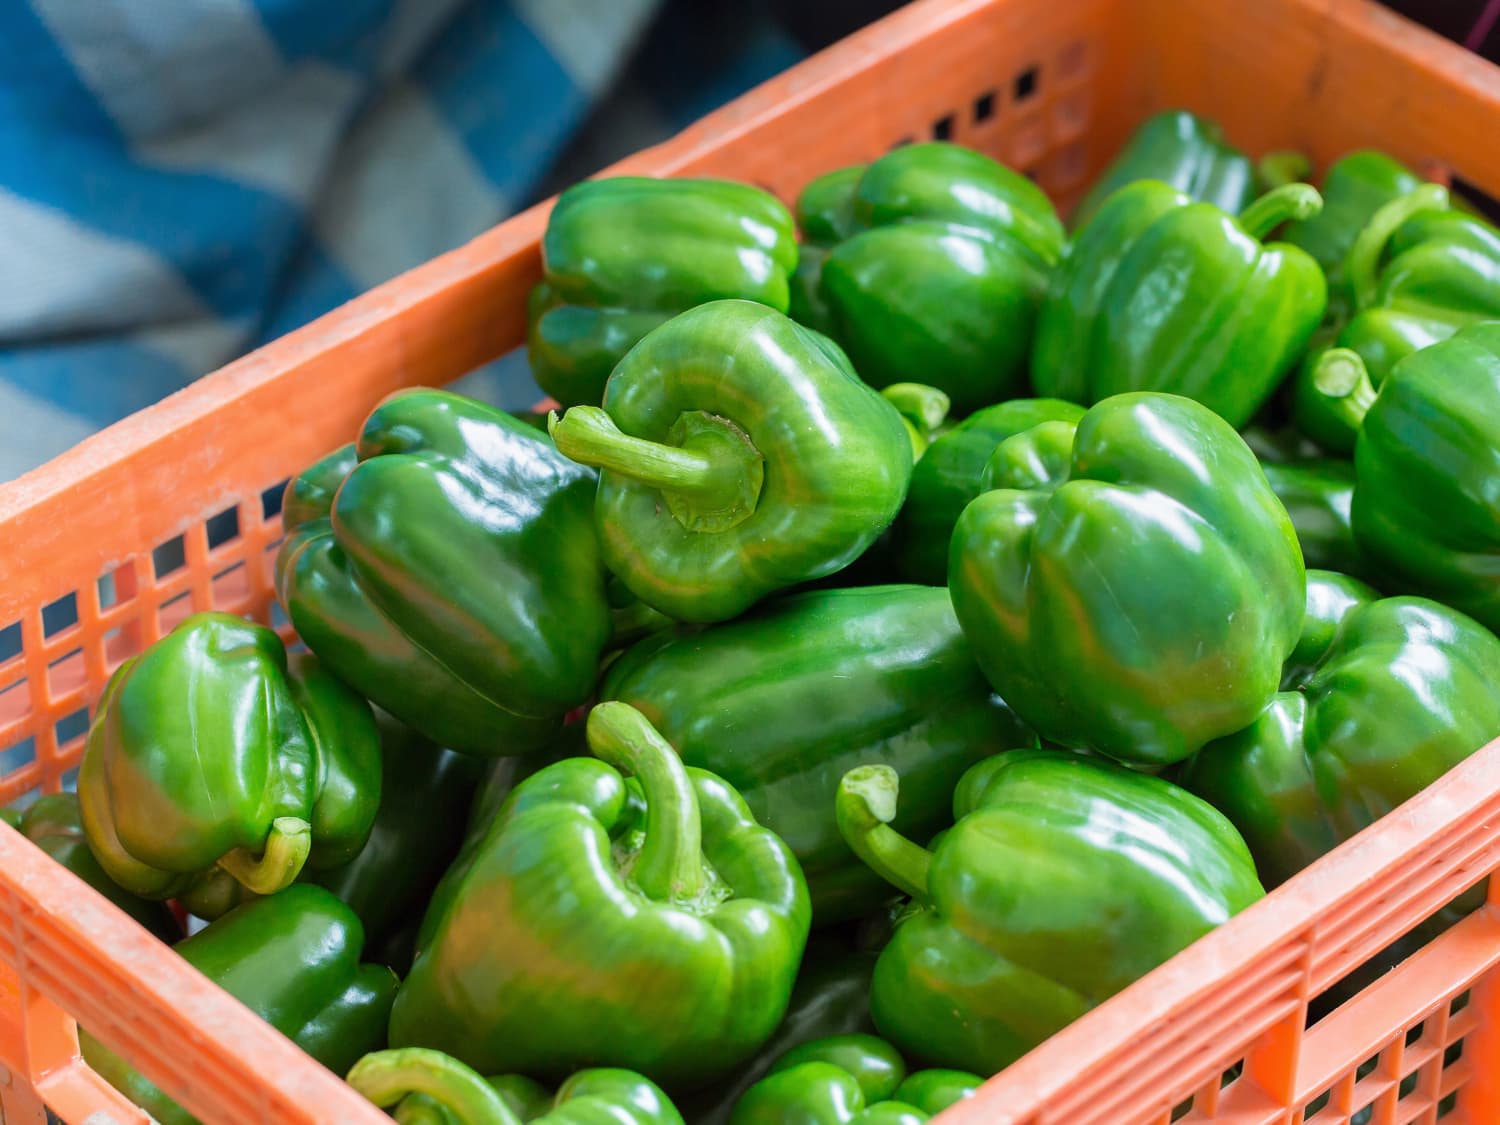 The Simple Reason Why Green Peppers Are Always Less Expensive